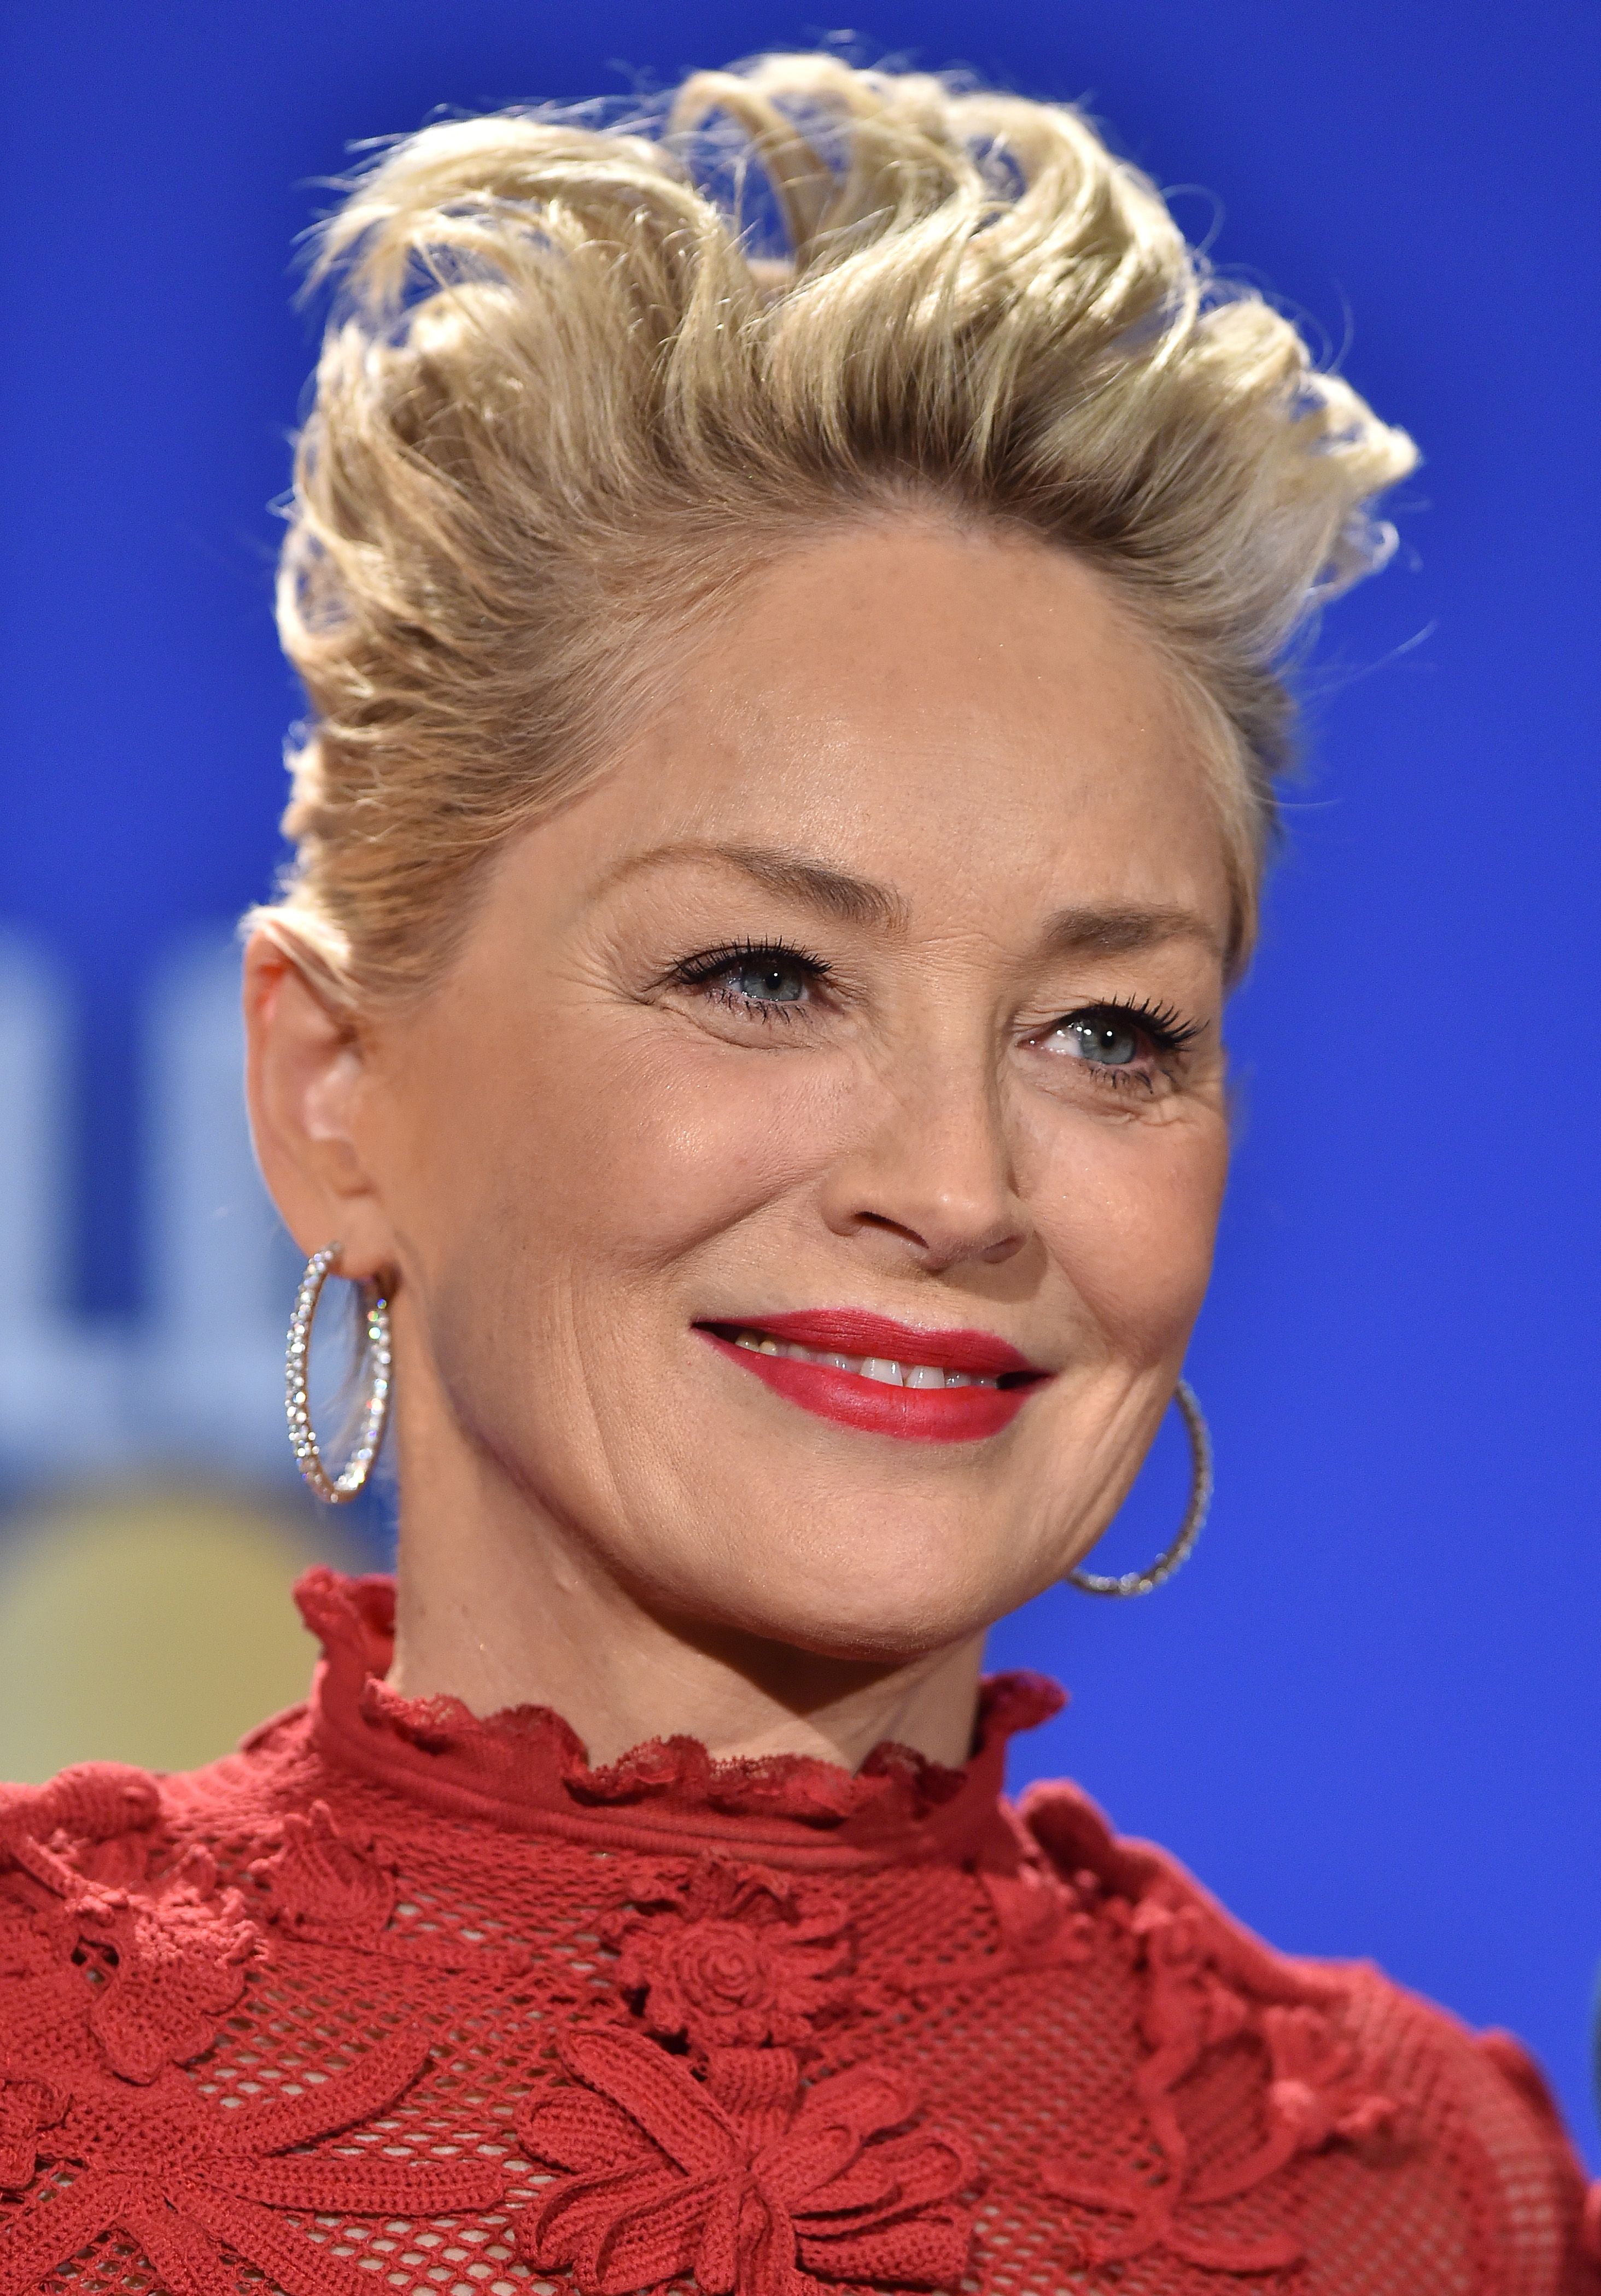 Sharon Stone Says She 'Lost 9 Children' Through Miscarriages